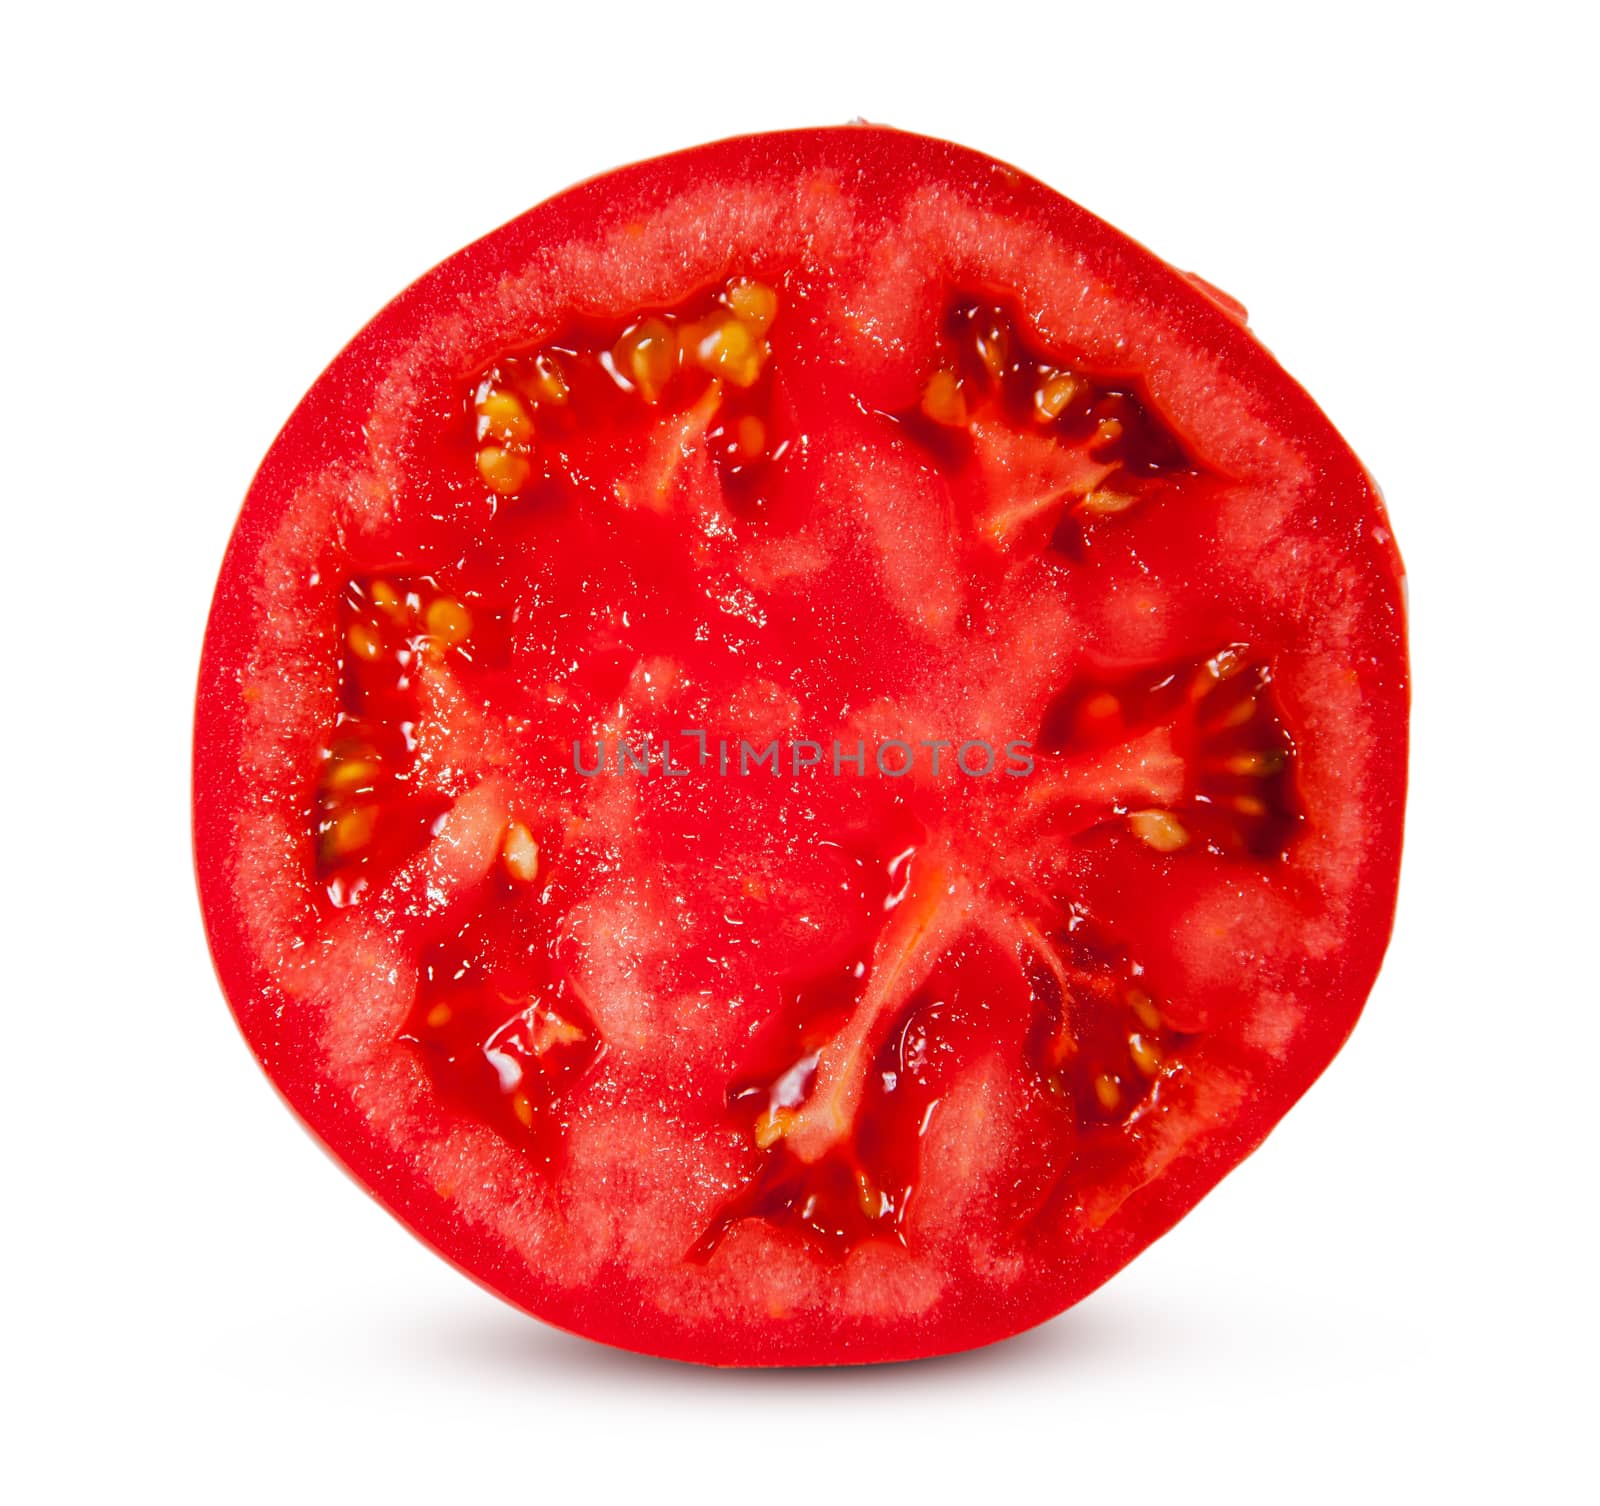 One half juicy red tomato by Cipariss